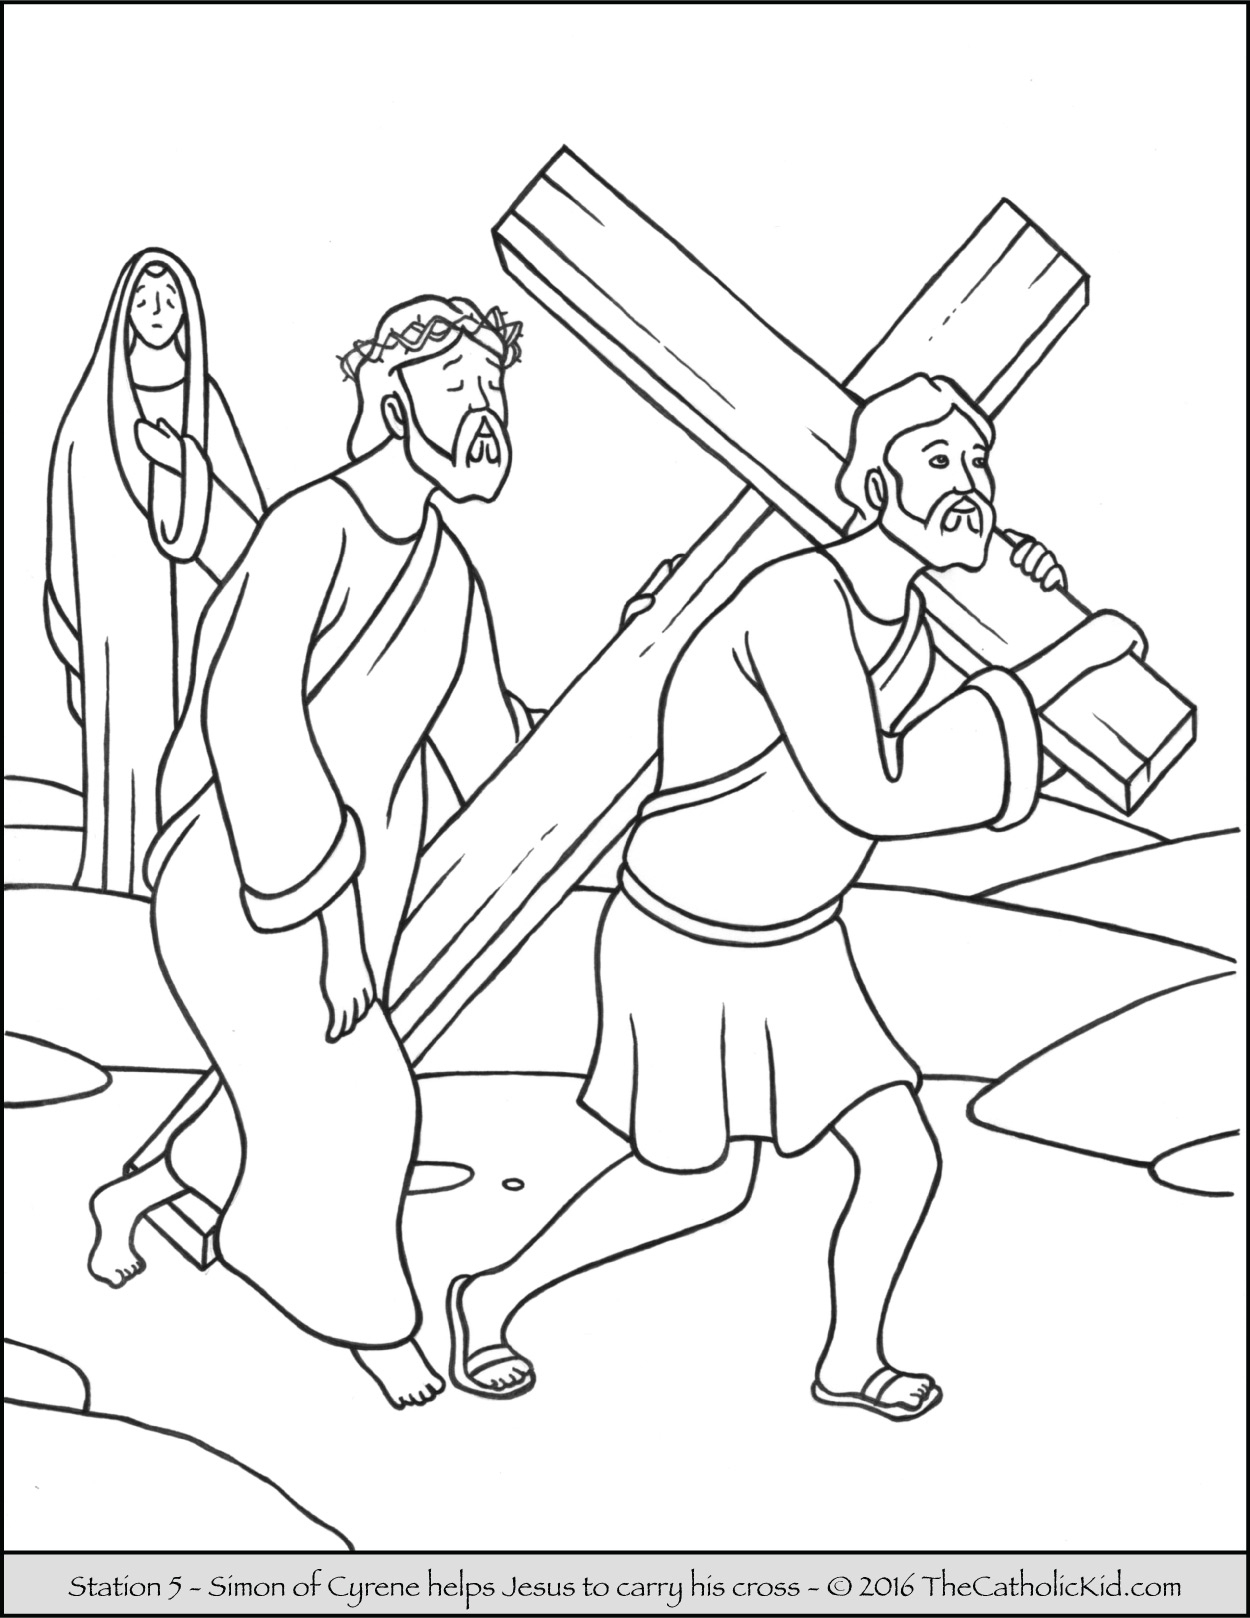 Stations Of The Cross Coloring Pages - The Catholic Kid | Stations Of The Cross Printable Worksheets